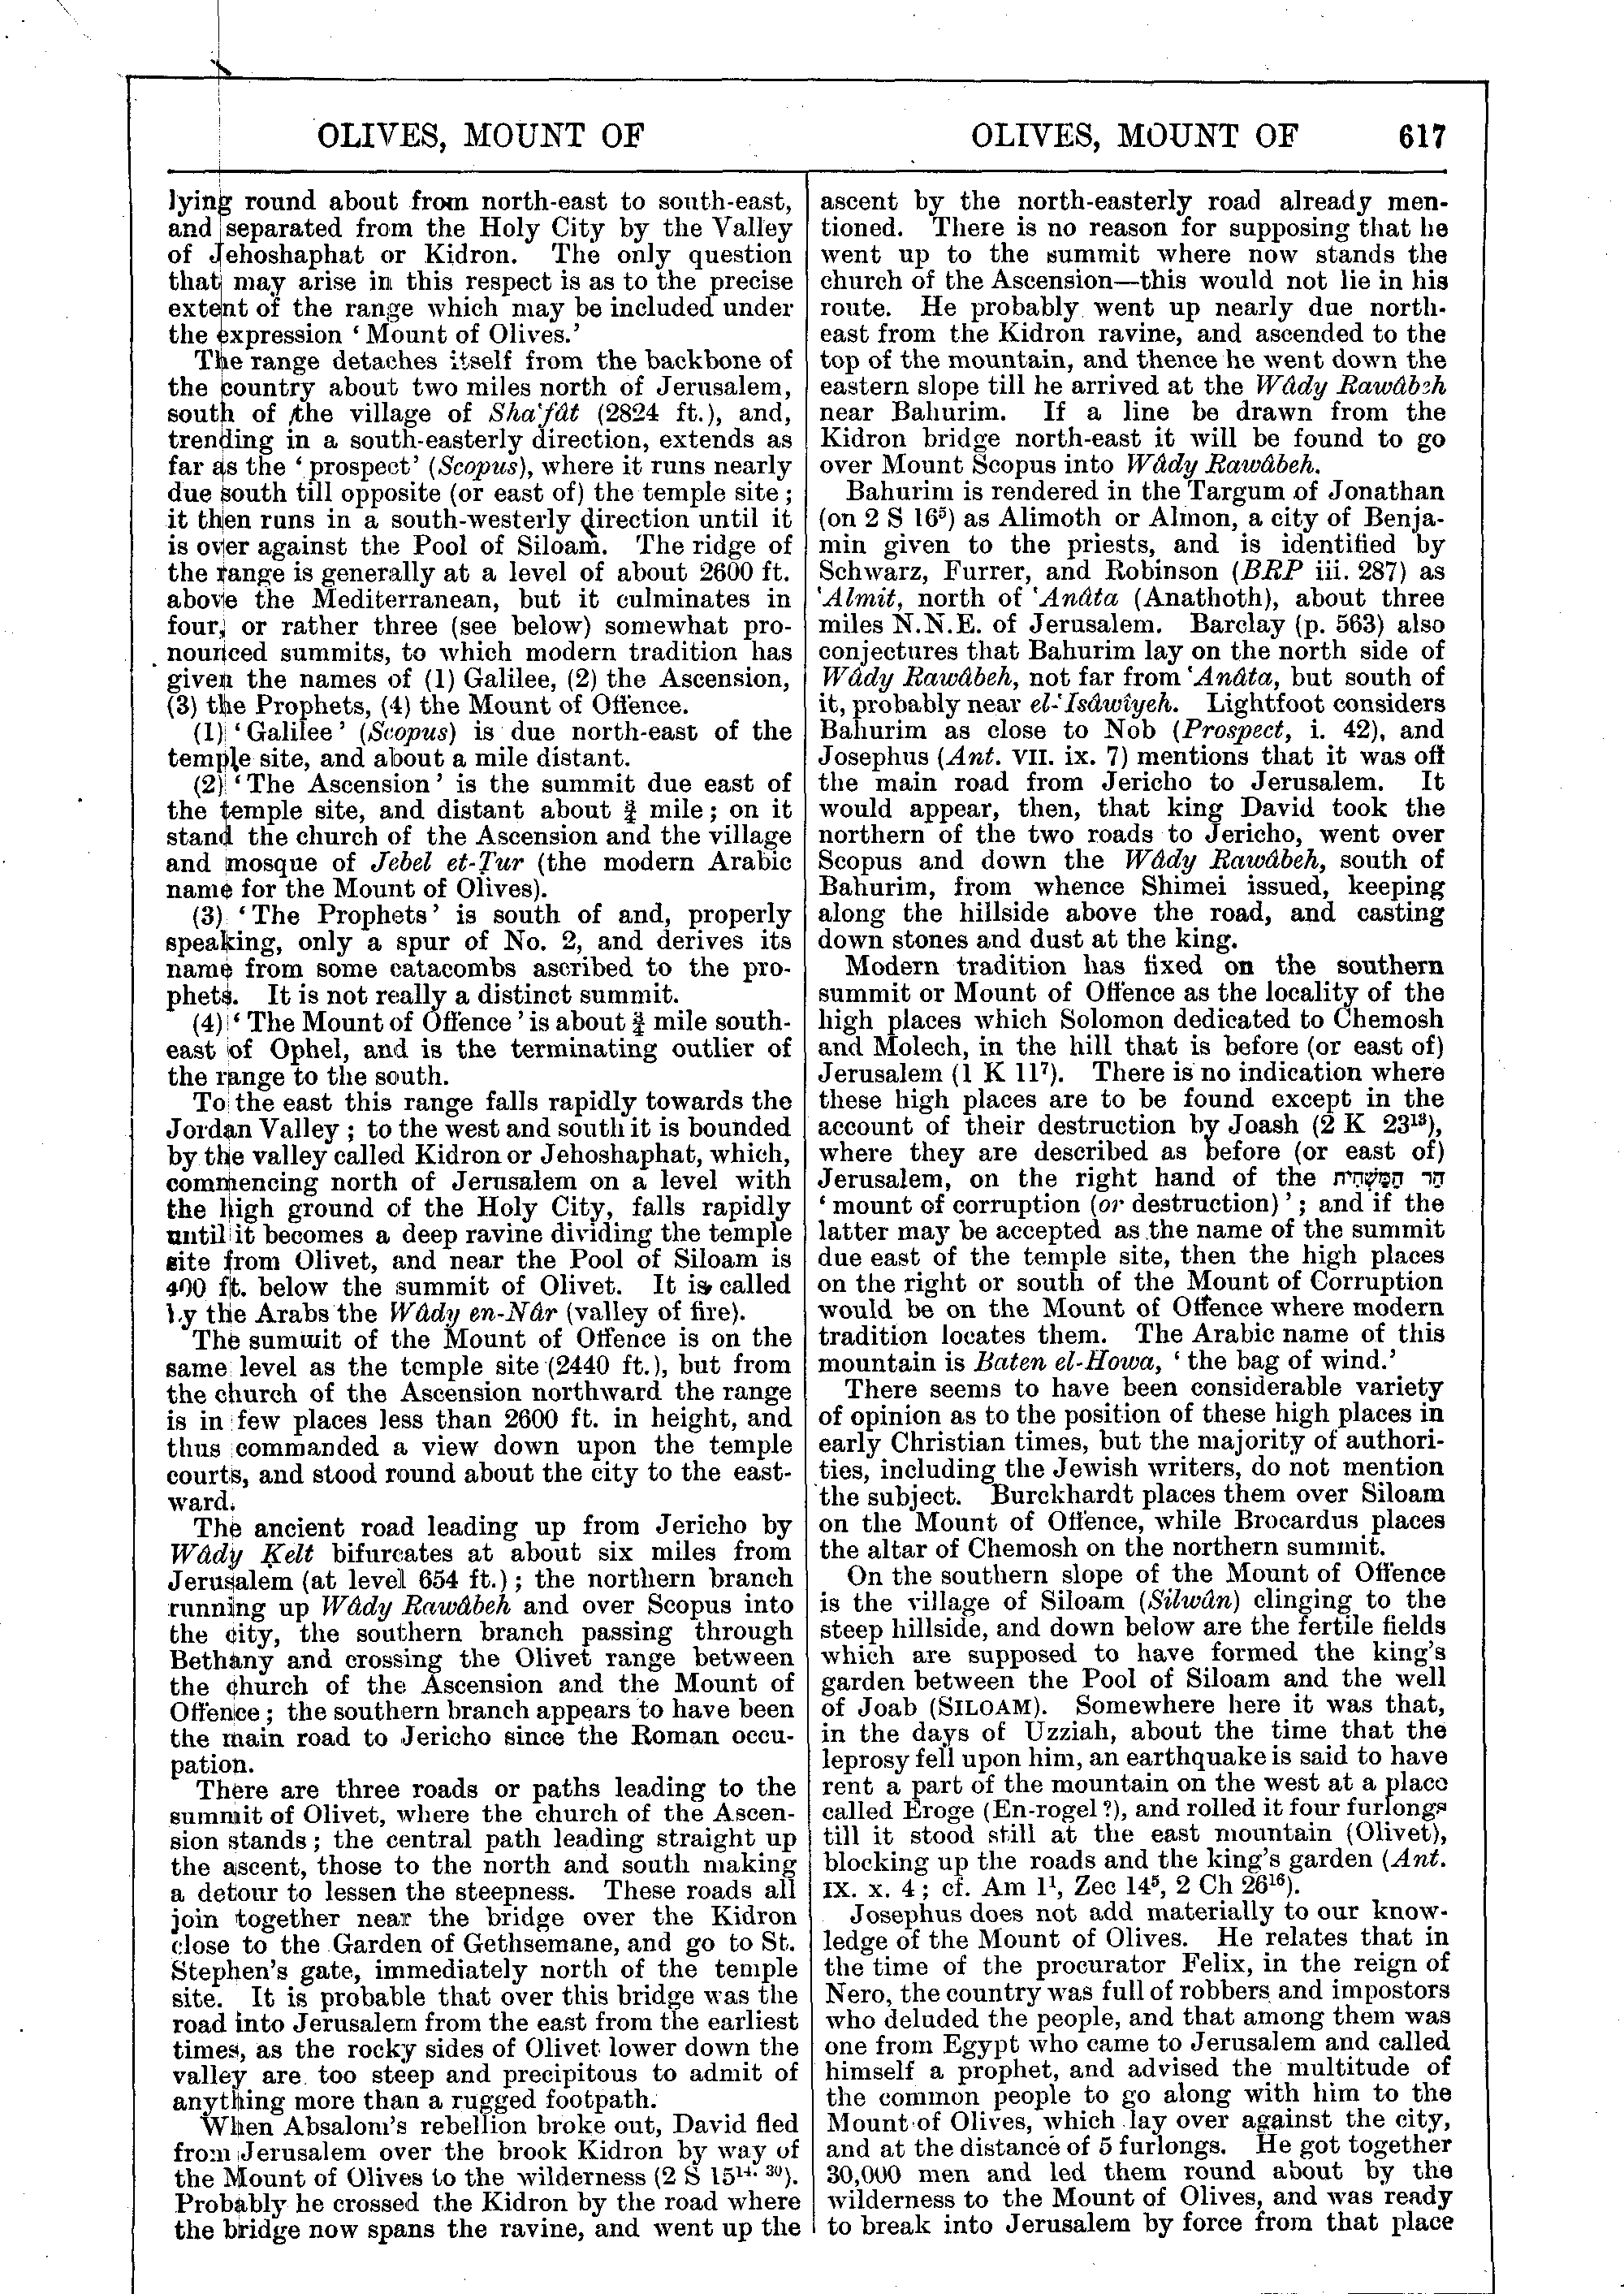 Image of page 617